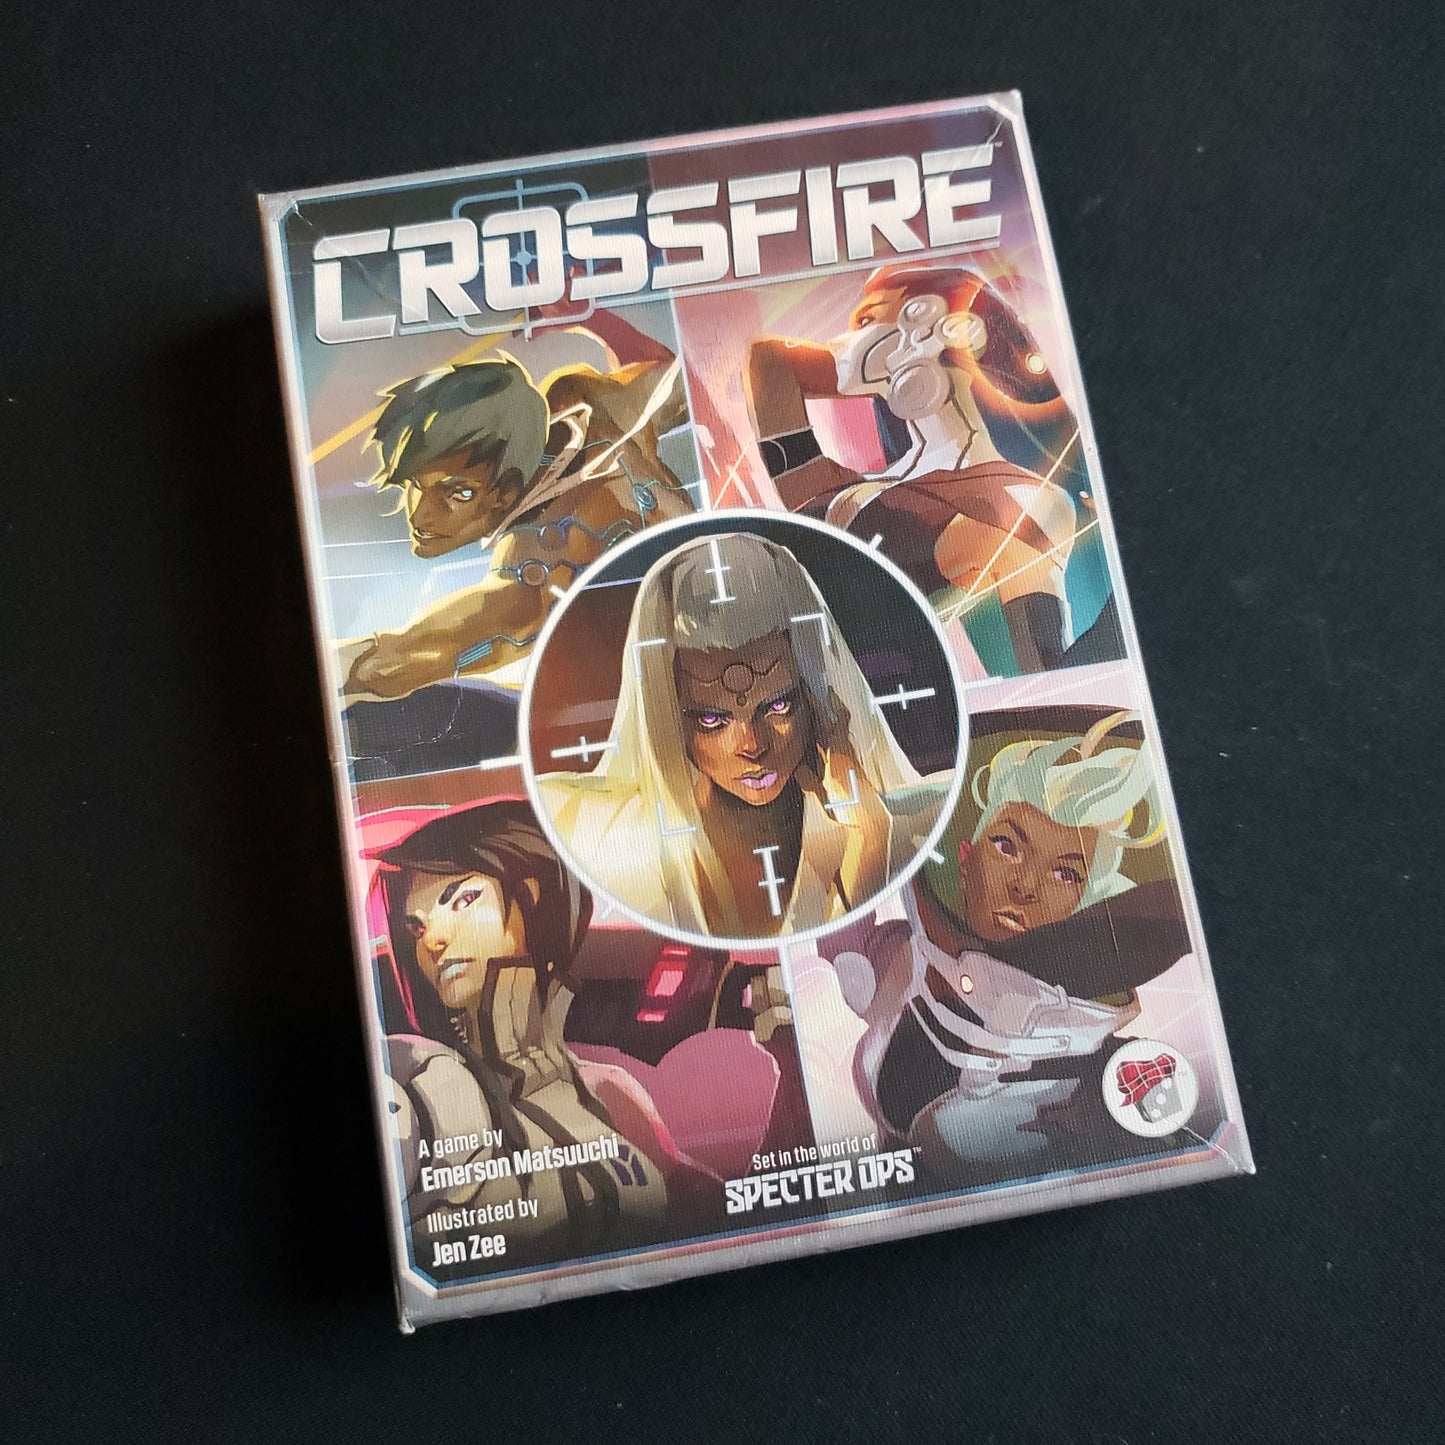 Image shows the front cover of the box of the Crossfire card game